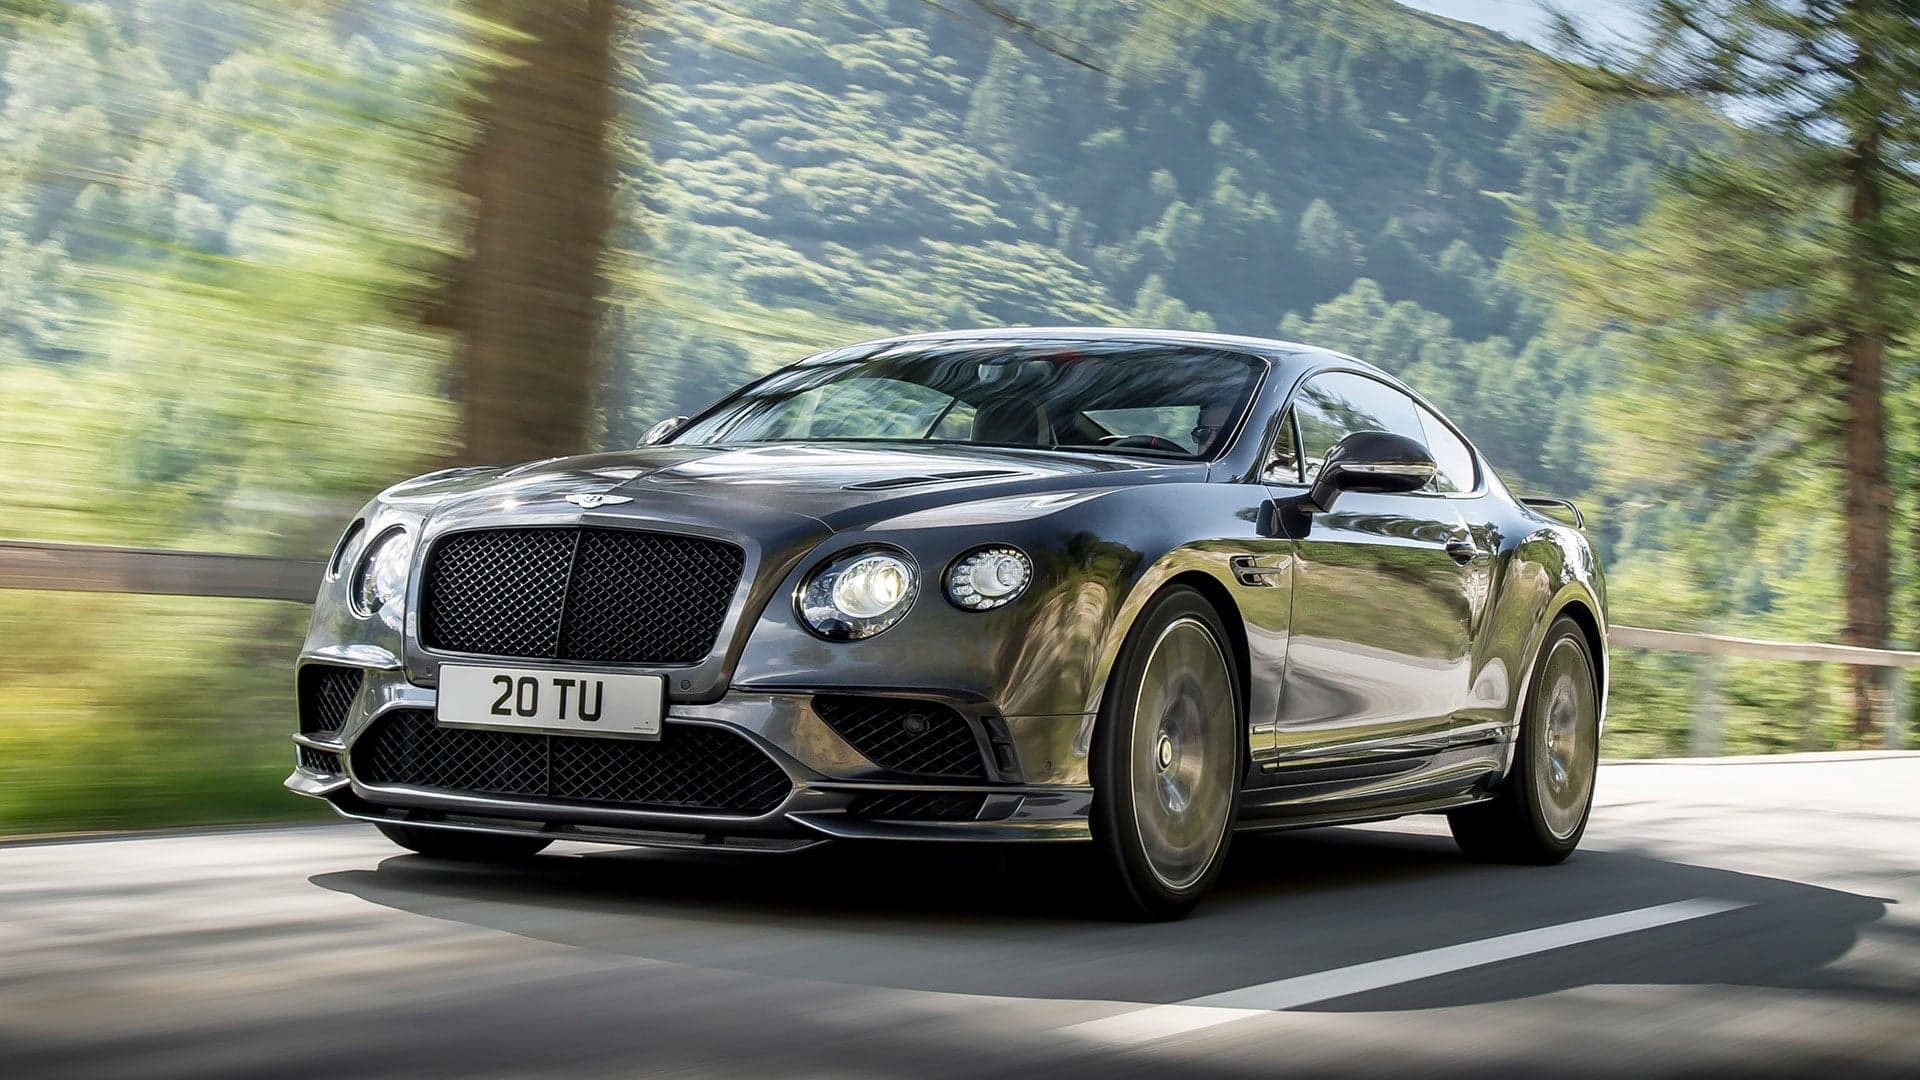 The New Bentley Continental Supersports Is the World’s Fastest Four-Seater